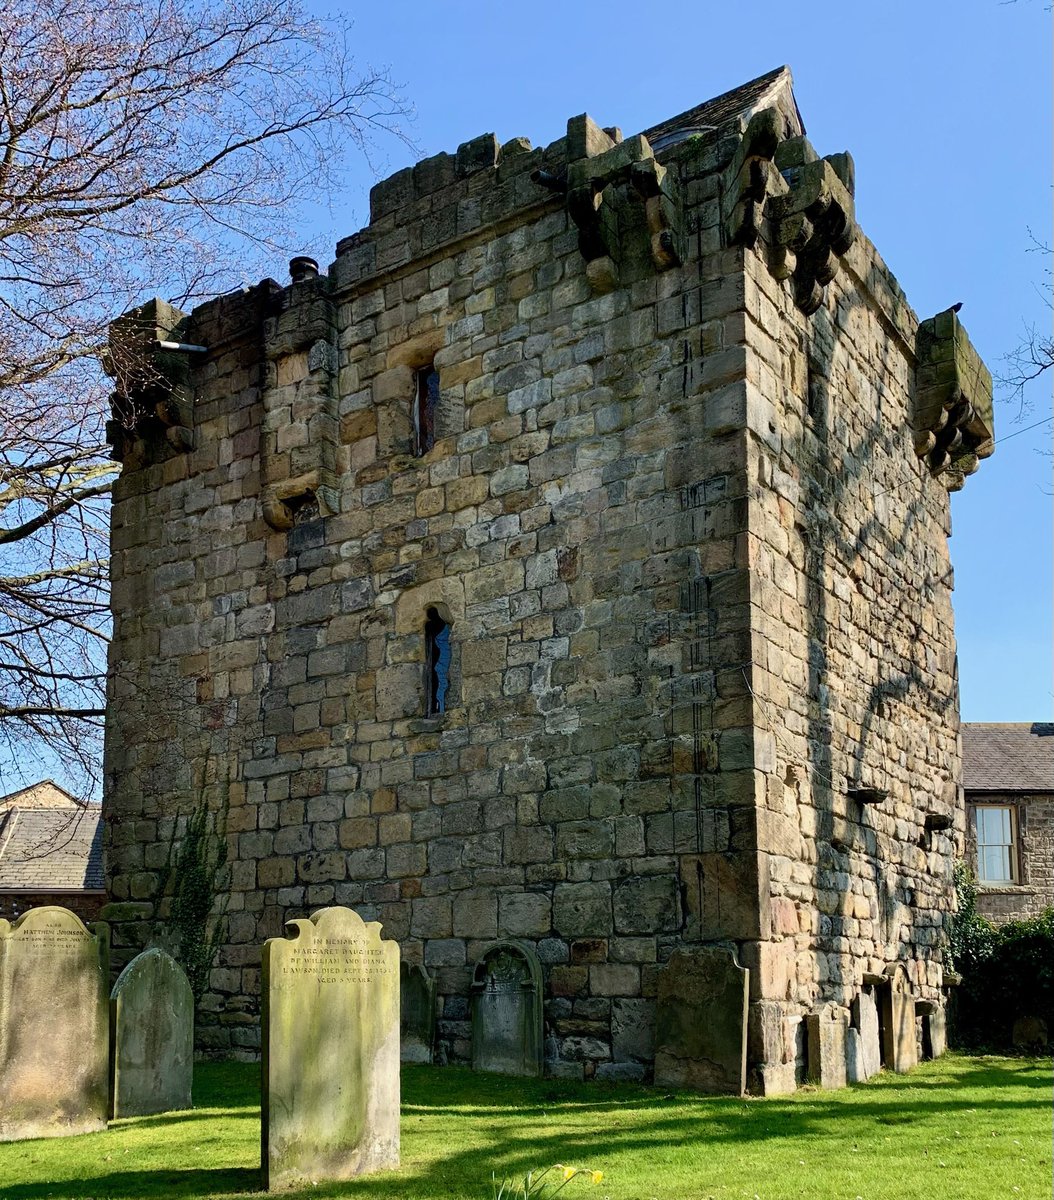 The early C14th Pele Tower at Corbridge in Northumberland. Built of stone from the Roman fort of Coria (Corbridge), it served as a fortified residence for the vicars of the nearby parish church of St. Andrews. #MedievalMonday 📸 My own.